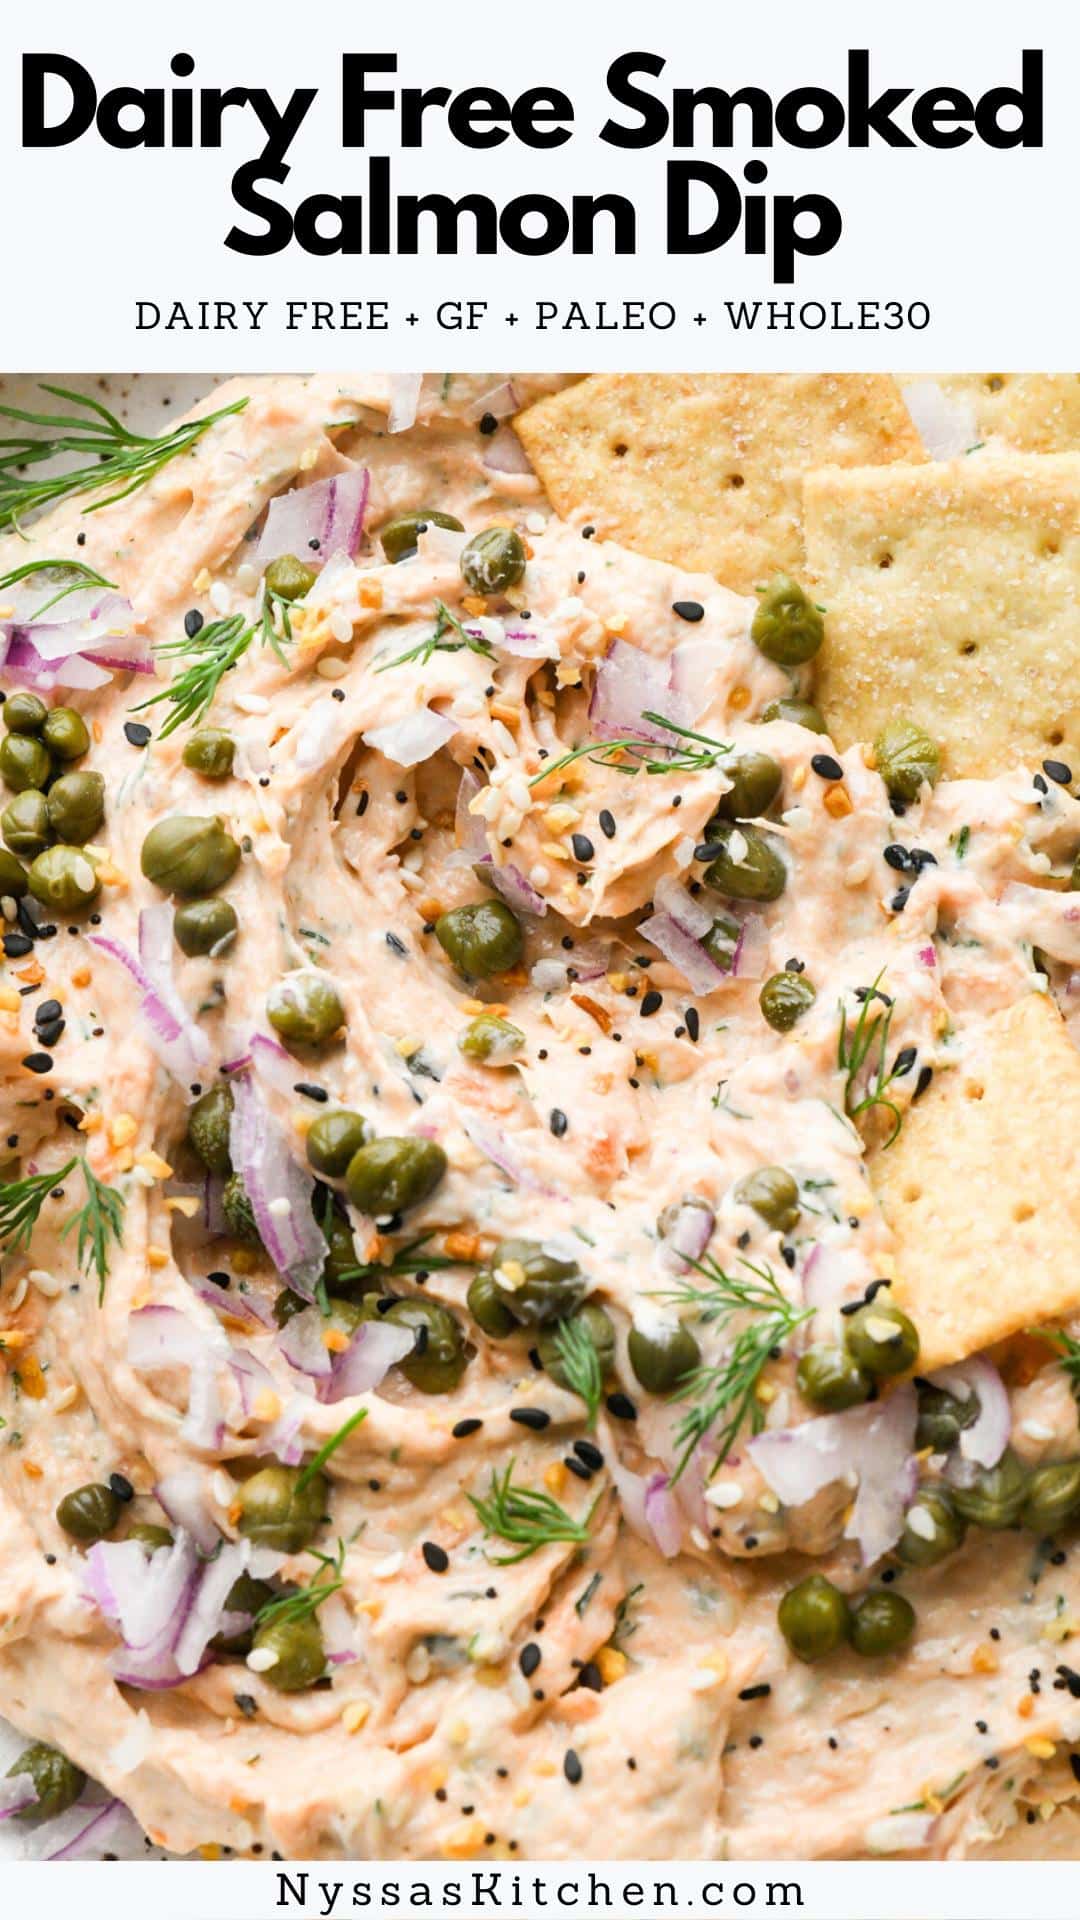 Learn how to transform a classic party dip into a dairy free delight with this recipe for dairy free smoked salmon dip! Made without cream cheese, this dip is the perfect appetizer for any gathering - with a creamy texture and an irresistibly bold flavor that will keep your guests coming back for more. Dairy free, gluten free, paleo friendly, and Whole30 friendly.